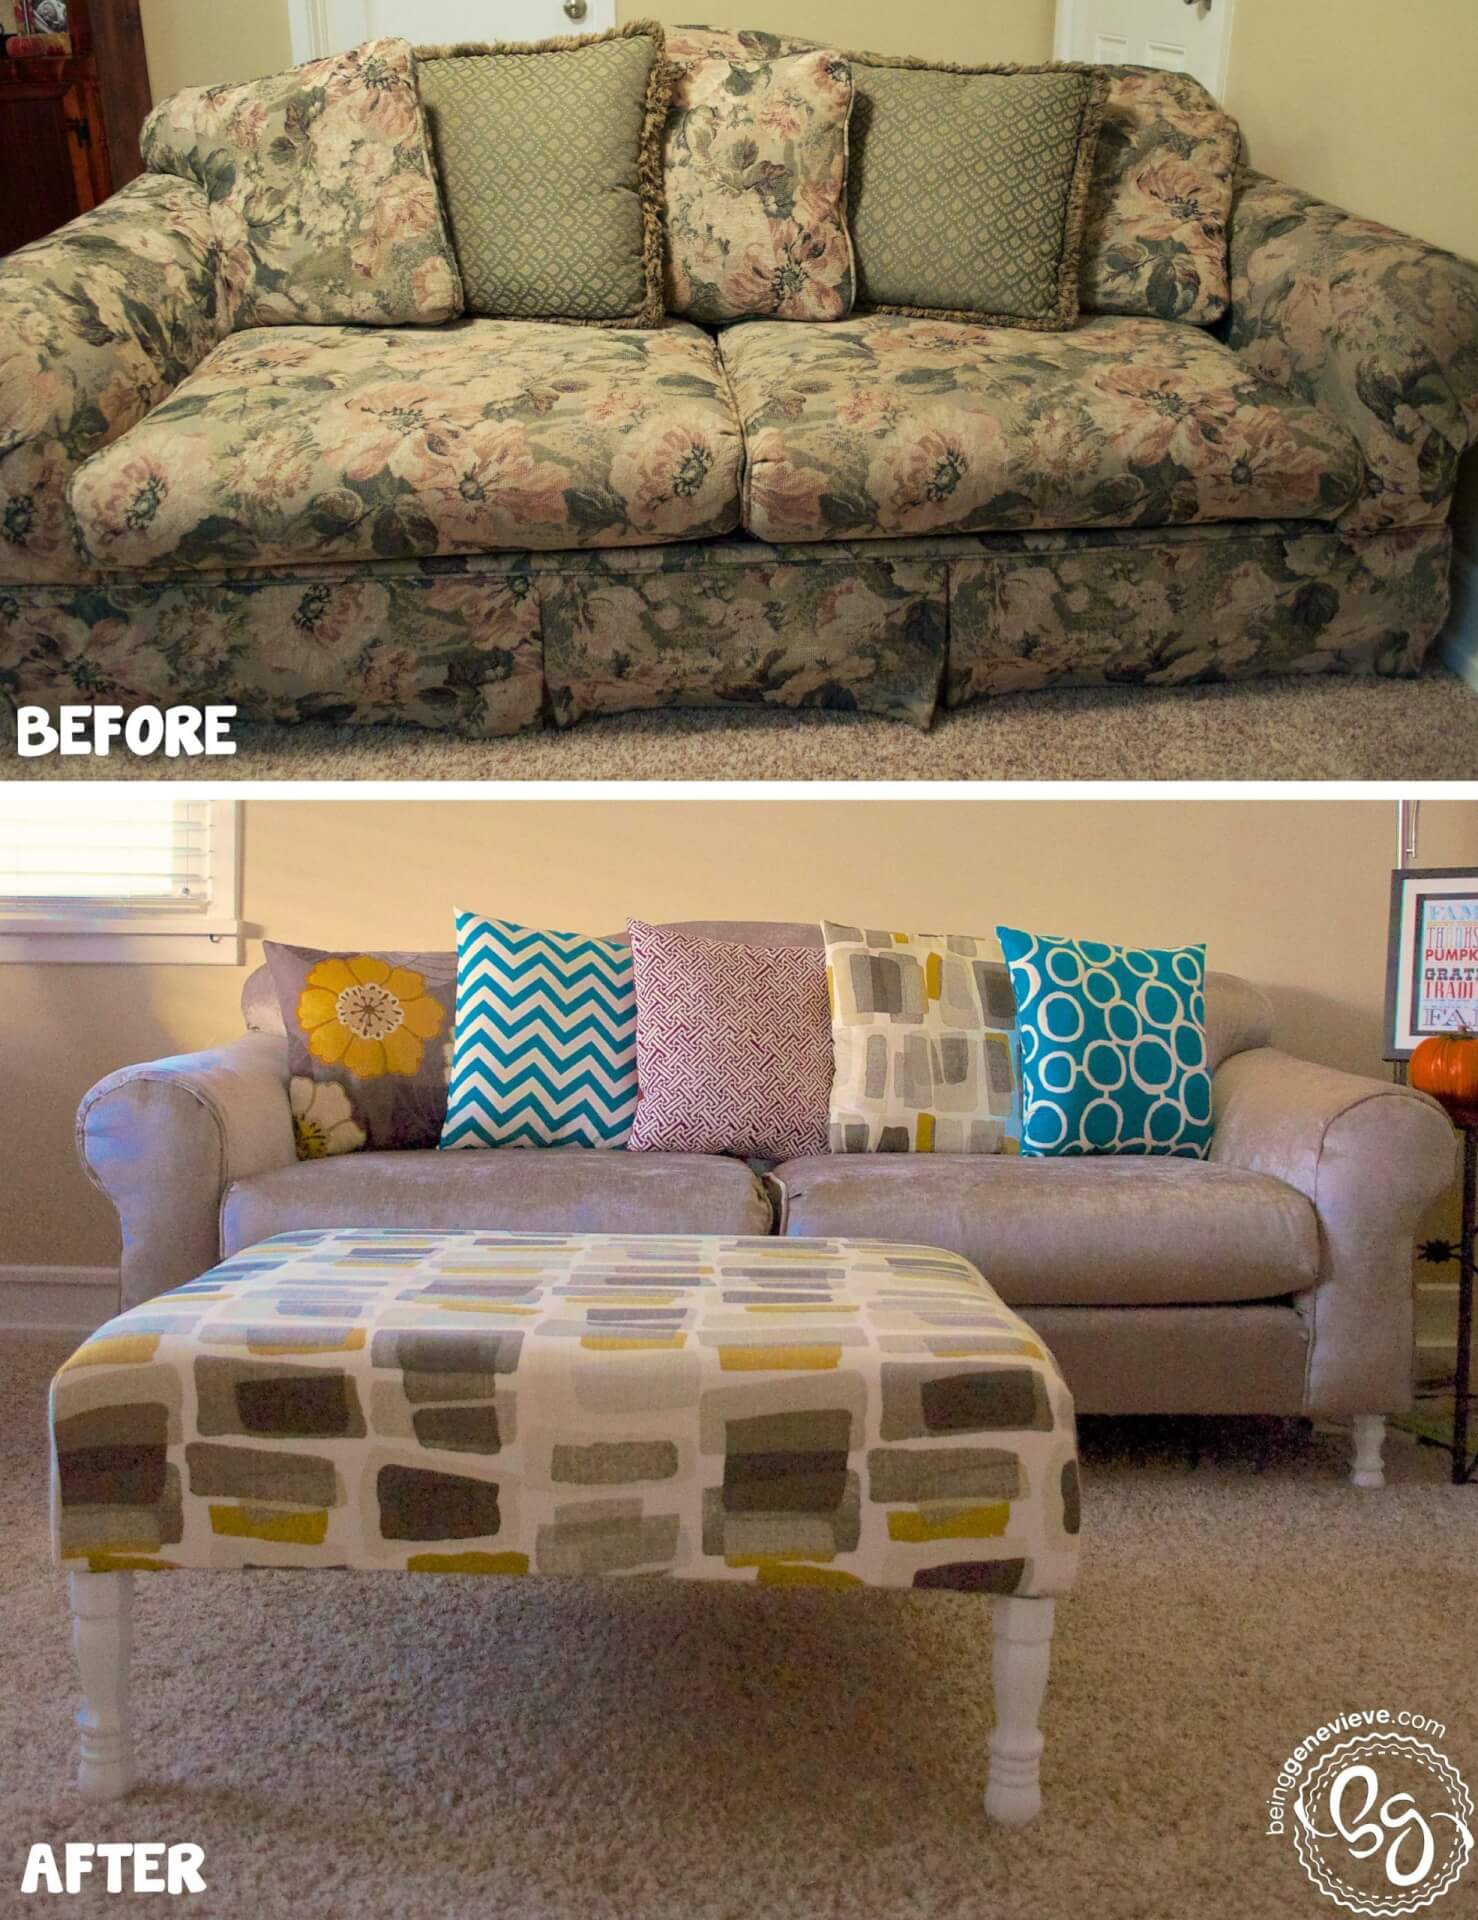 Reupholstery: Put It Together